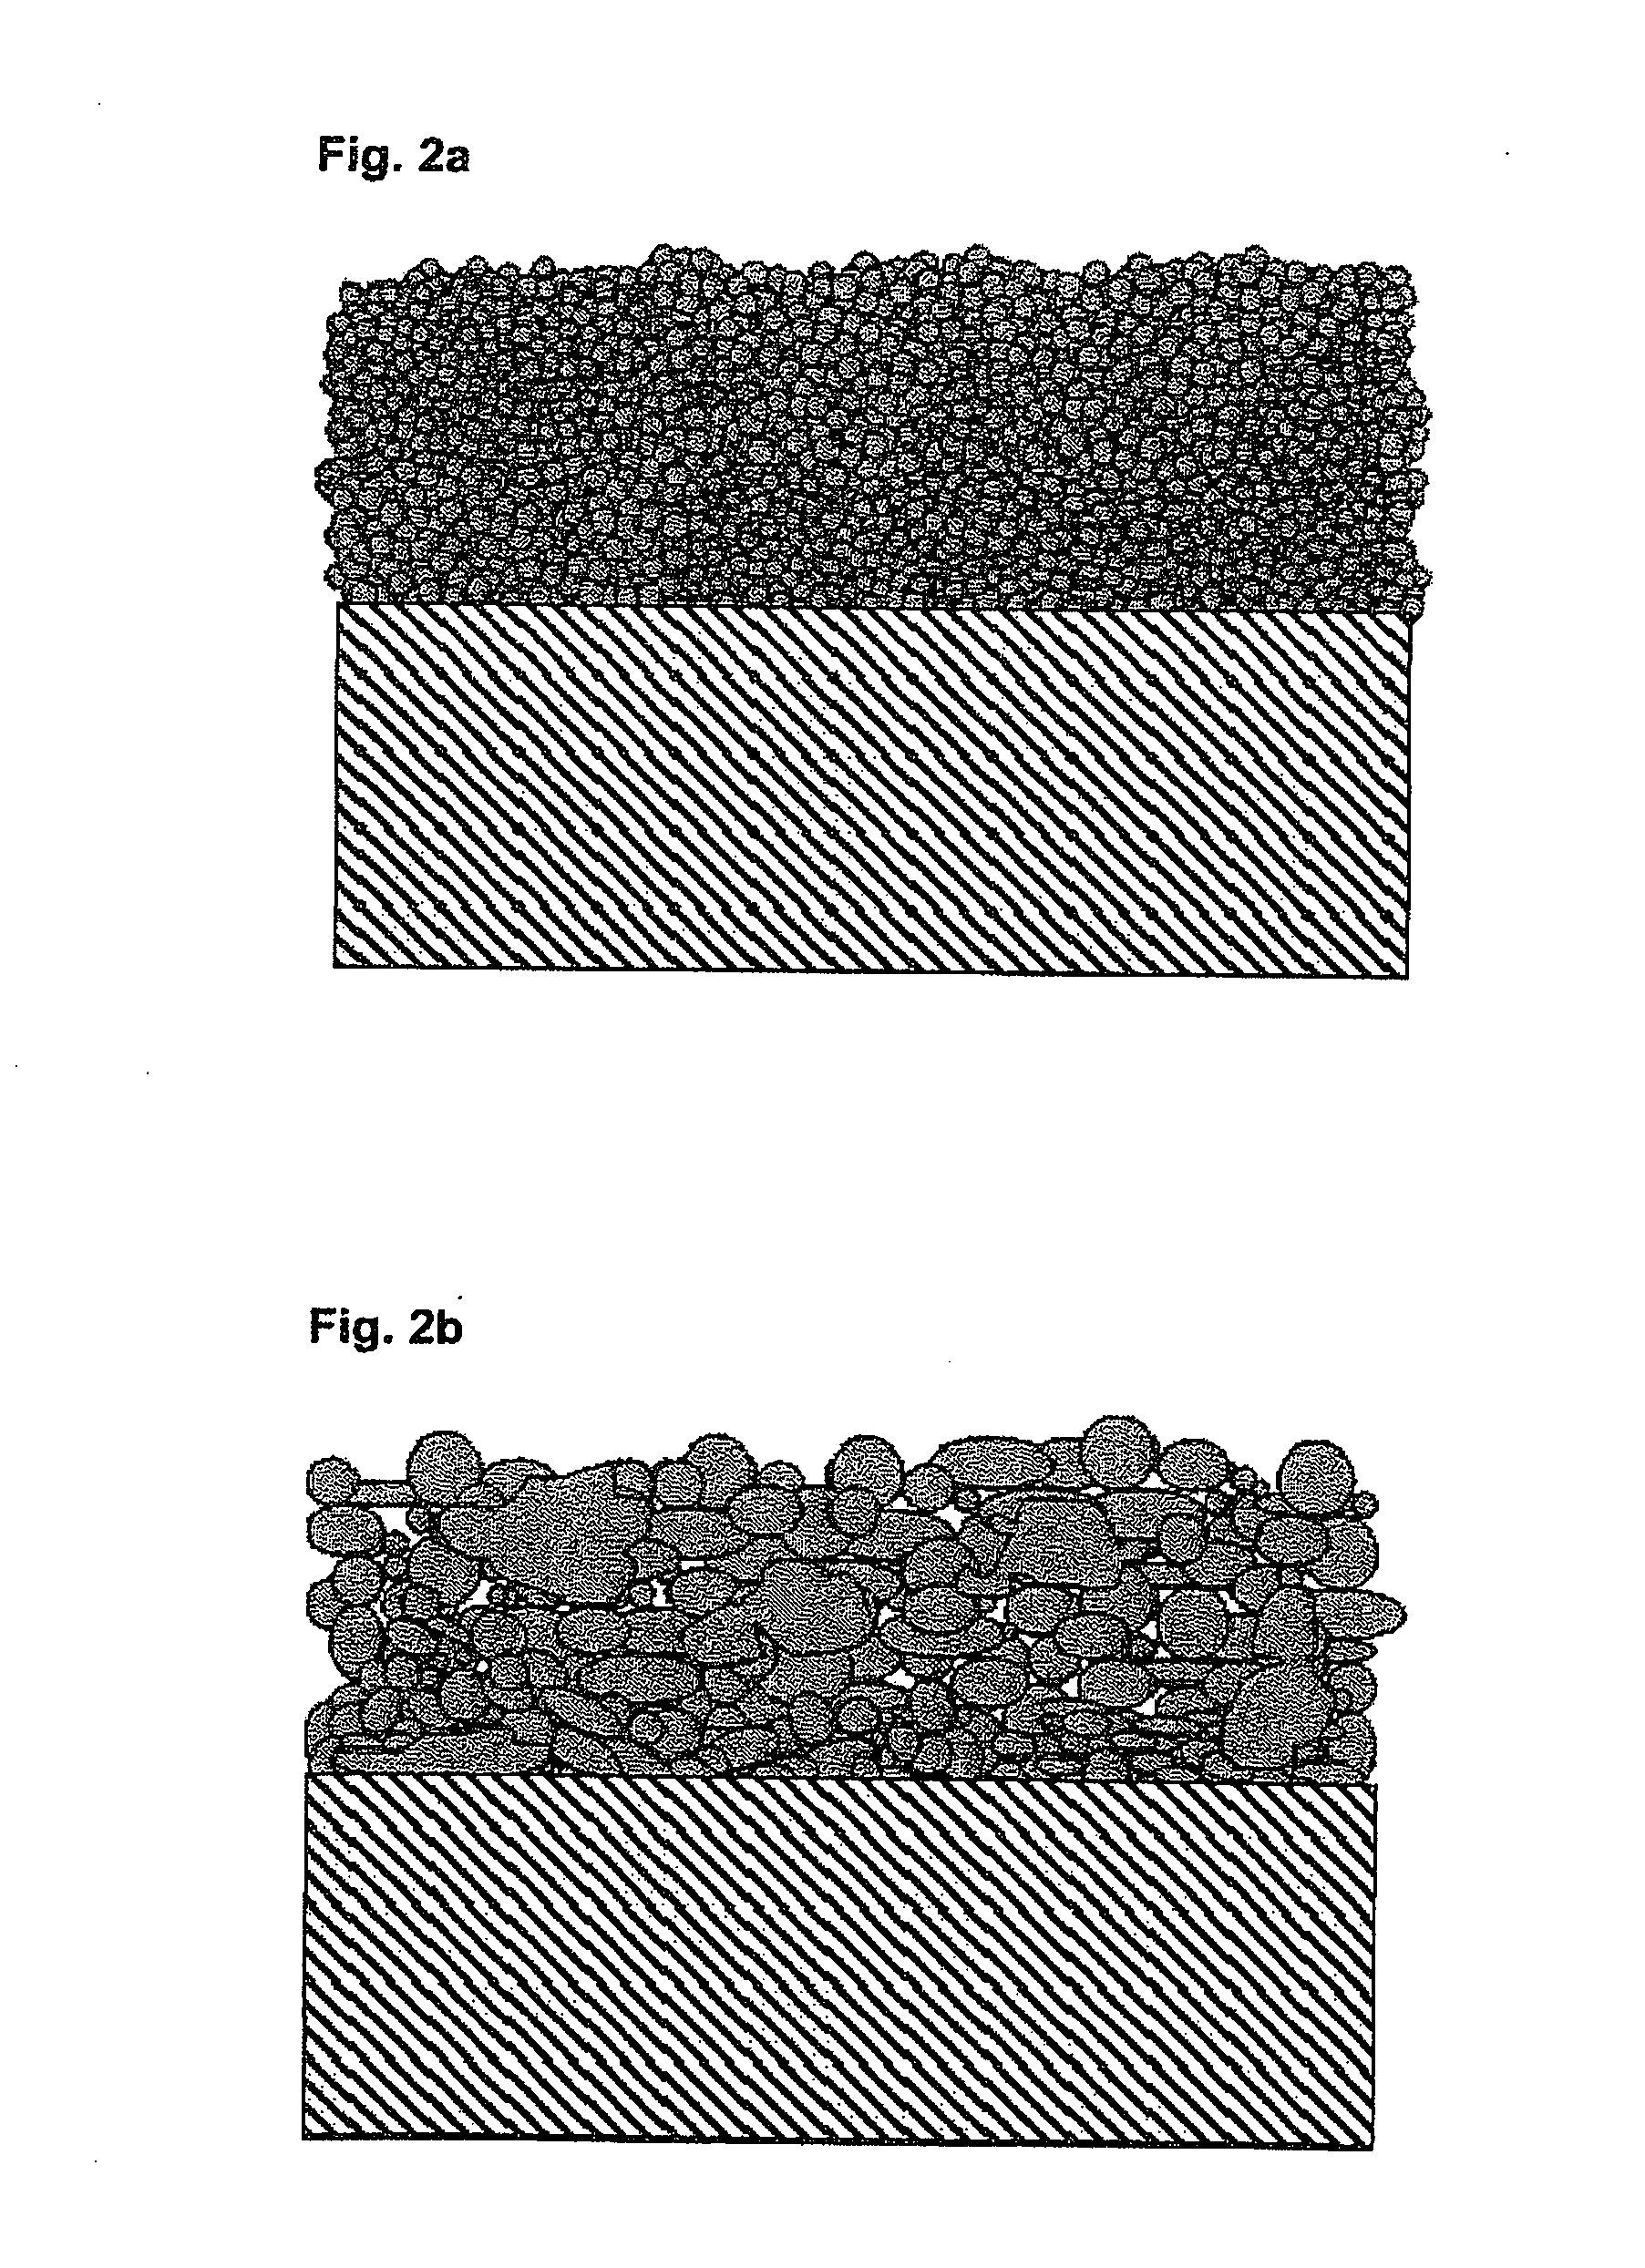 Firmly adhering silicon nitride-containing release layer